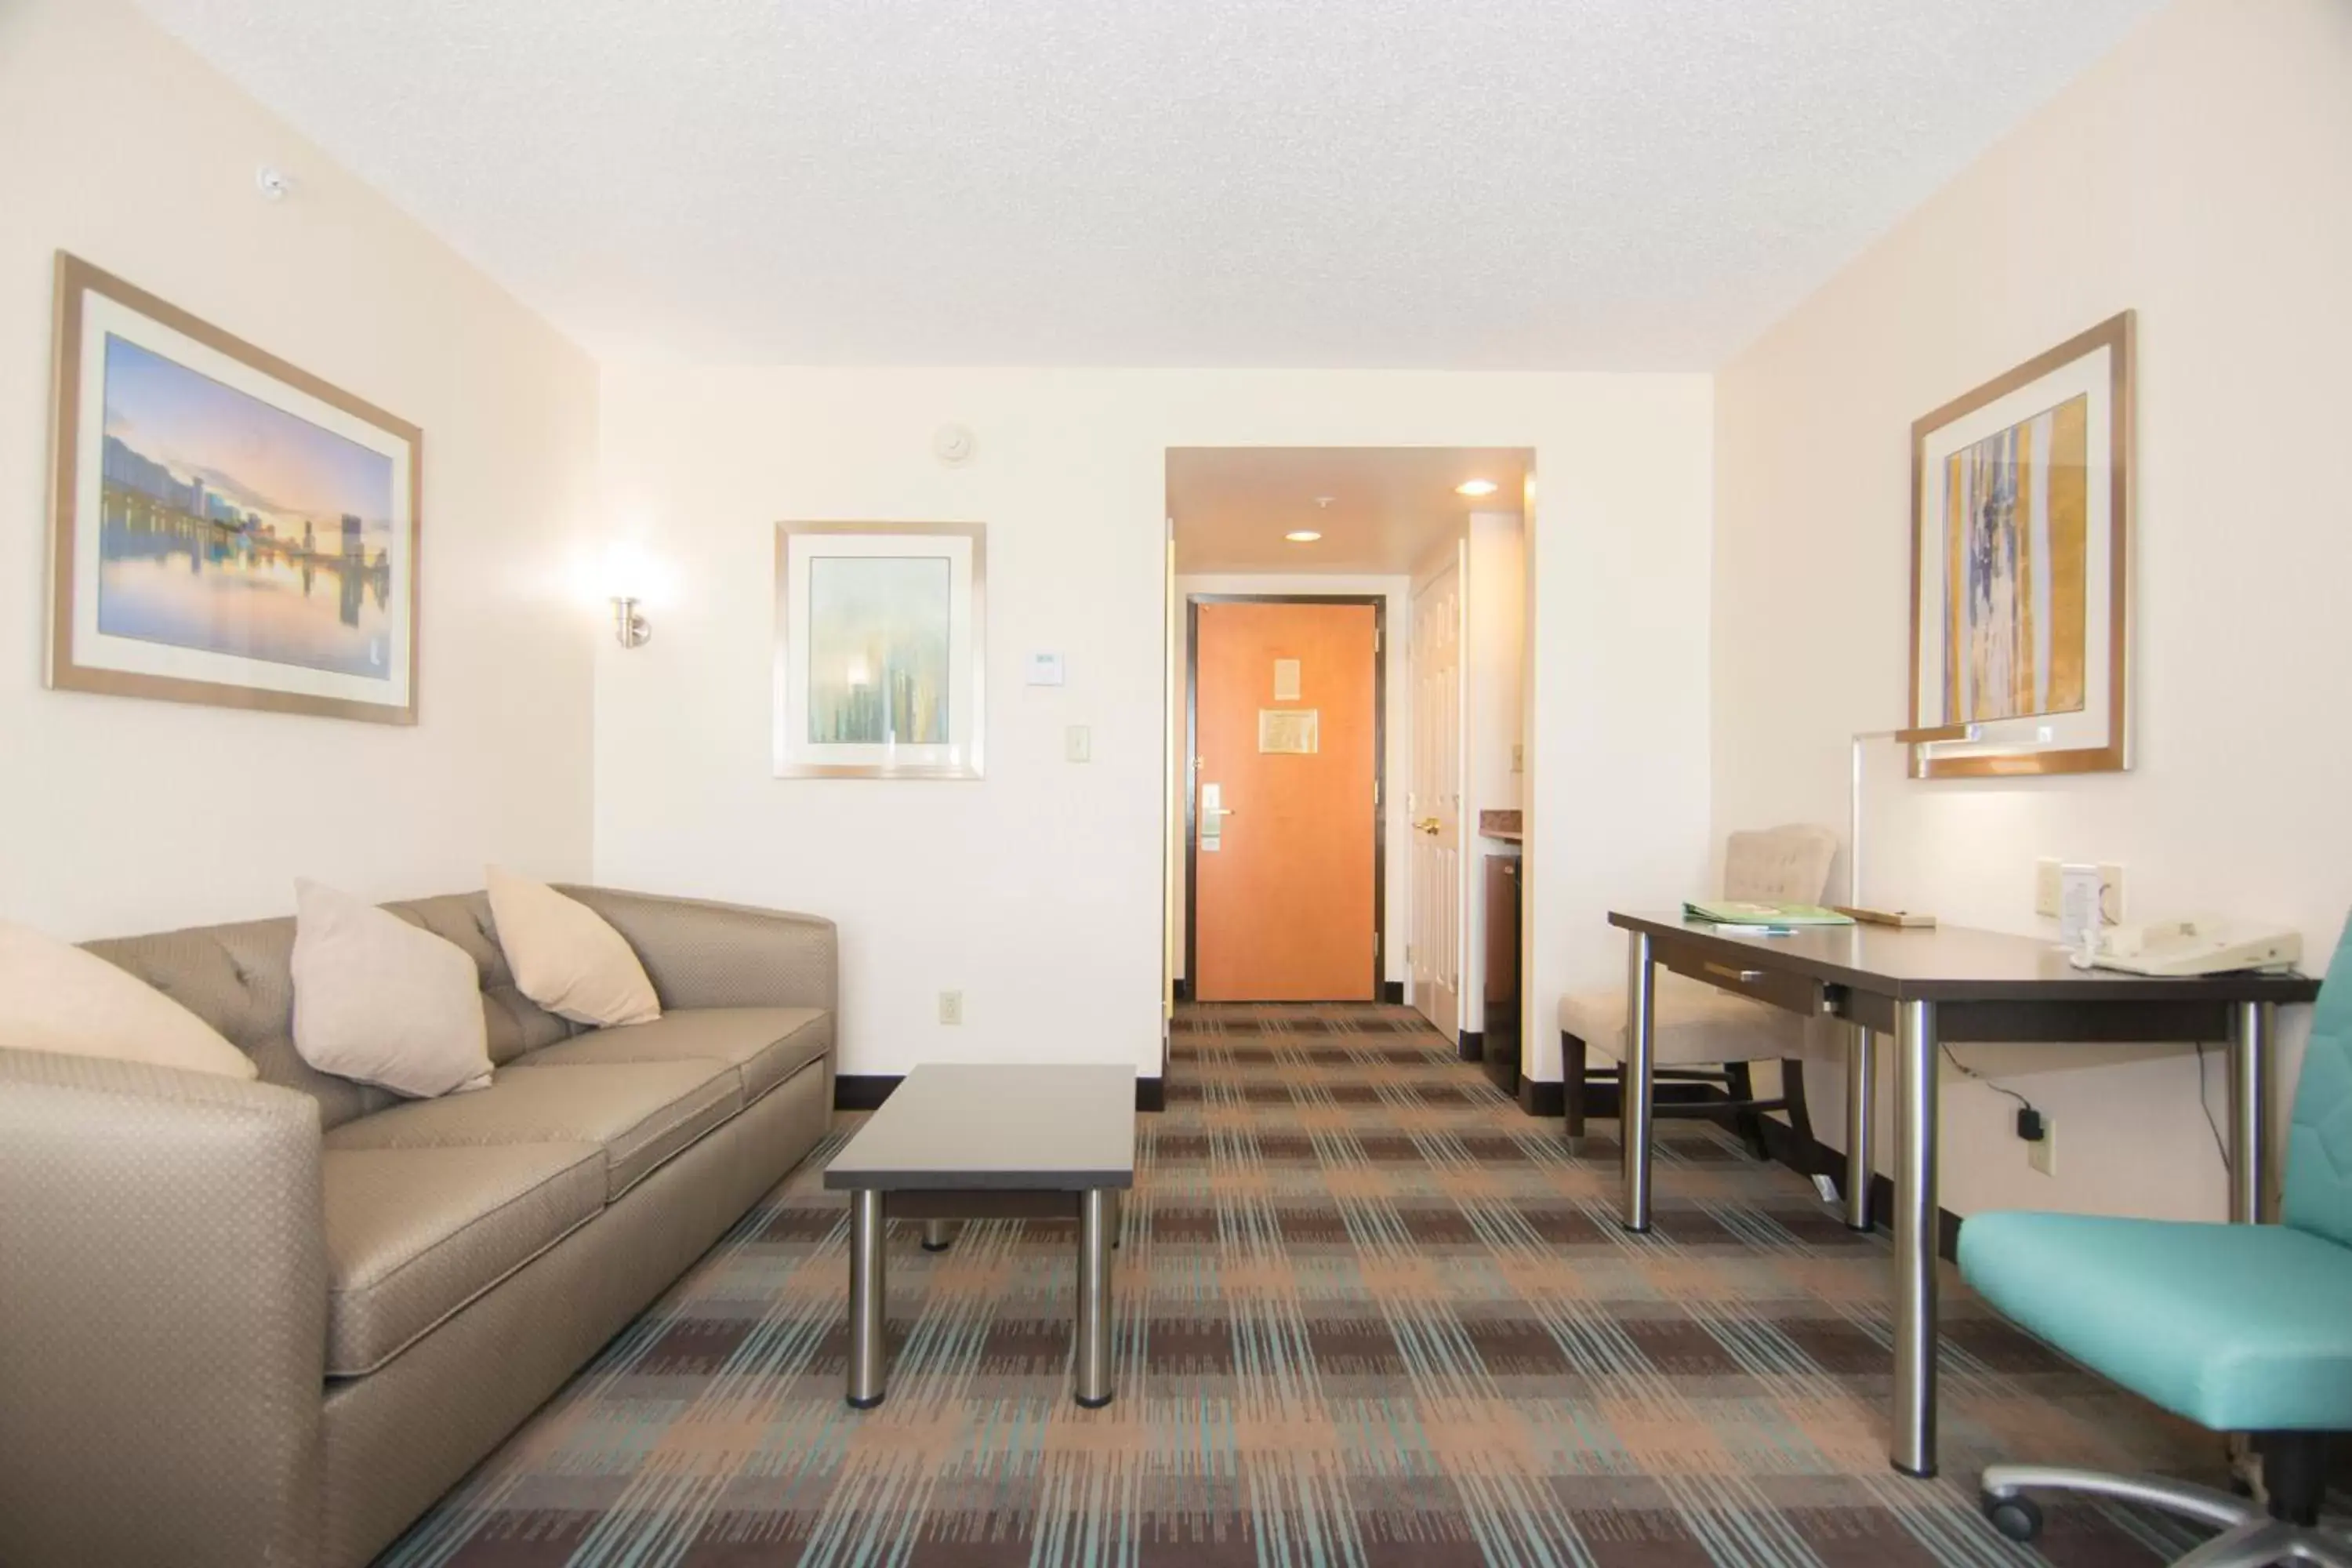 Deluxe King Room with Bath Tub - Mobility/Hearing Accessible - Non-Smoking in Wingate By Wyndham - Orlando International Airport